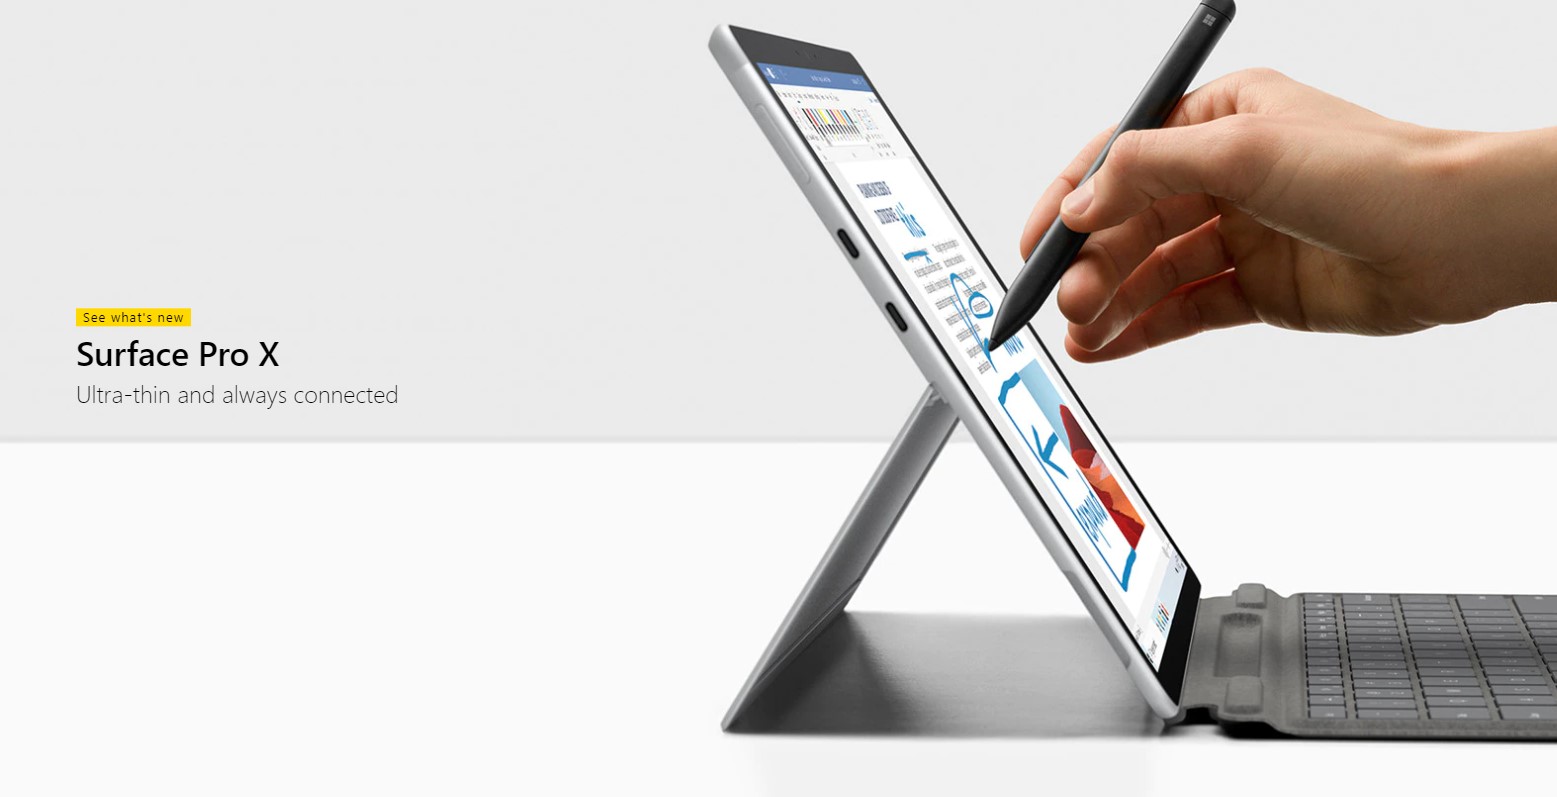 Find detailed information about Surface Pro X